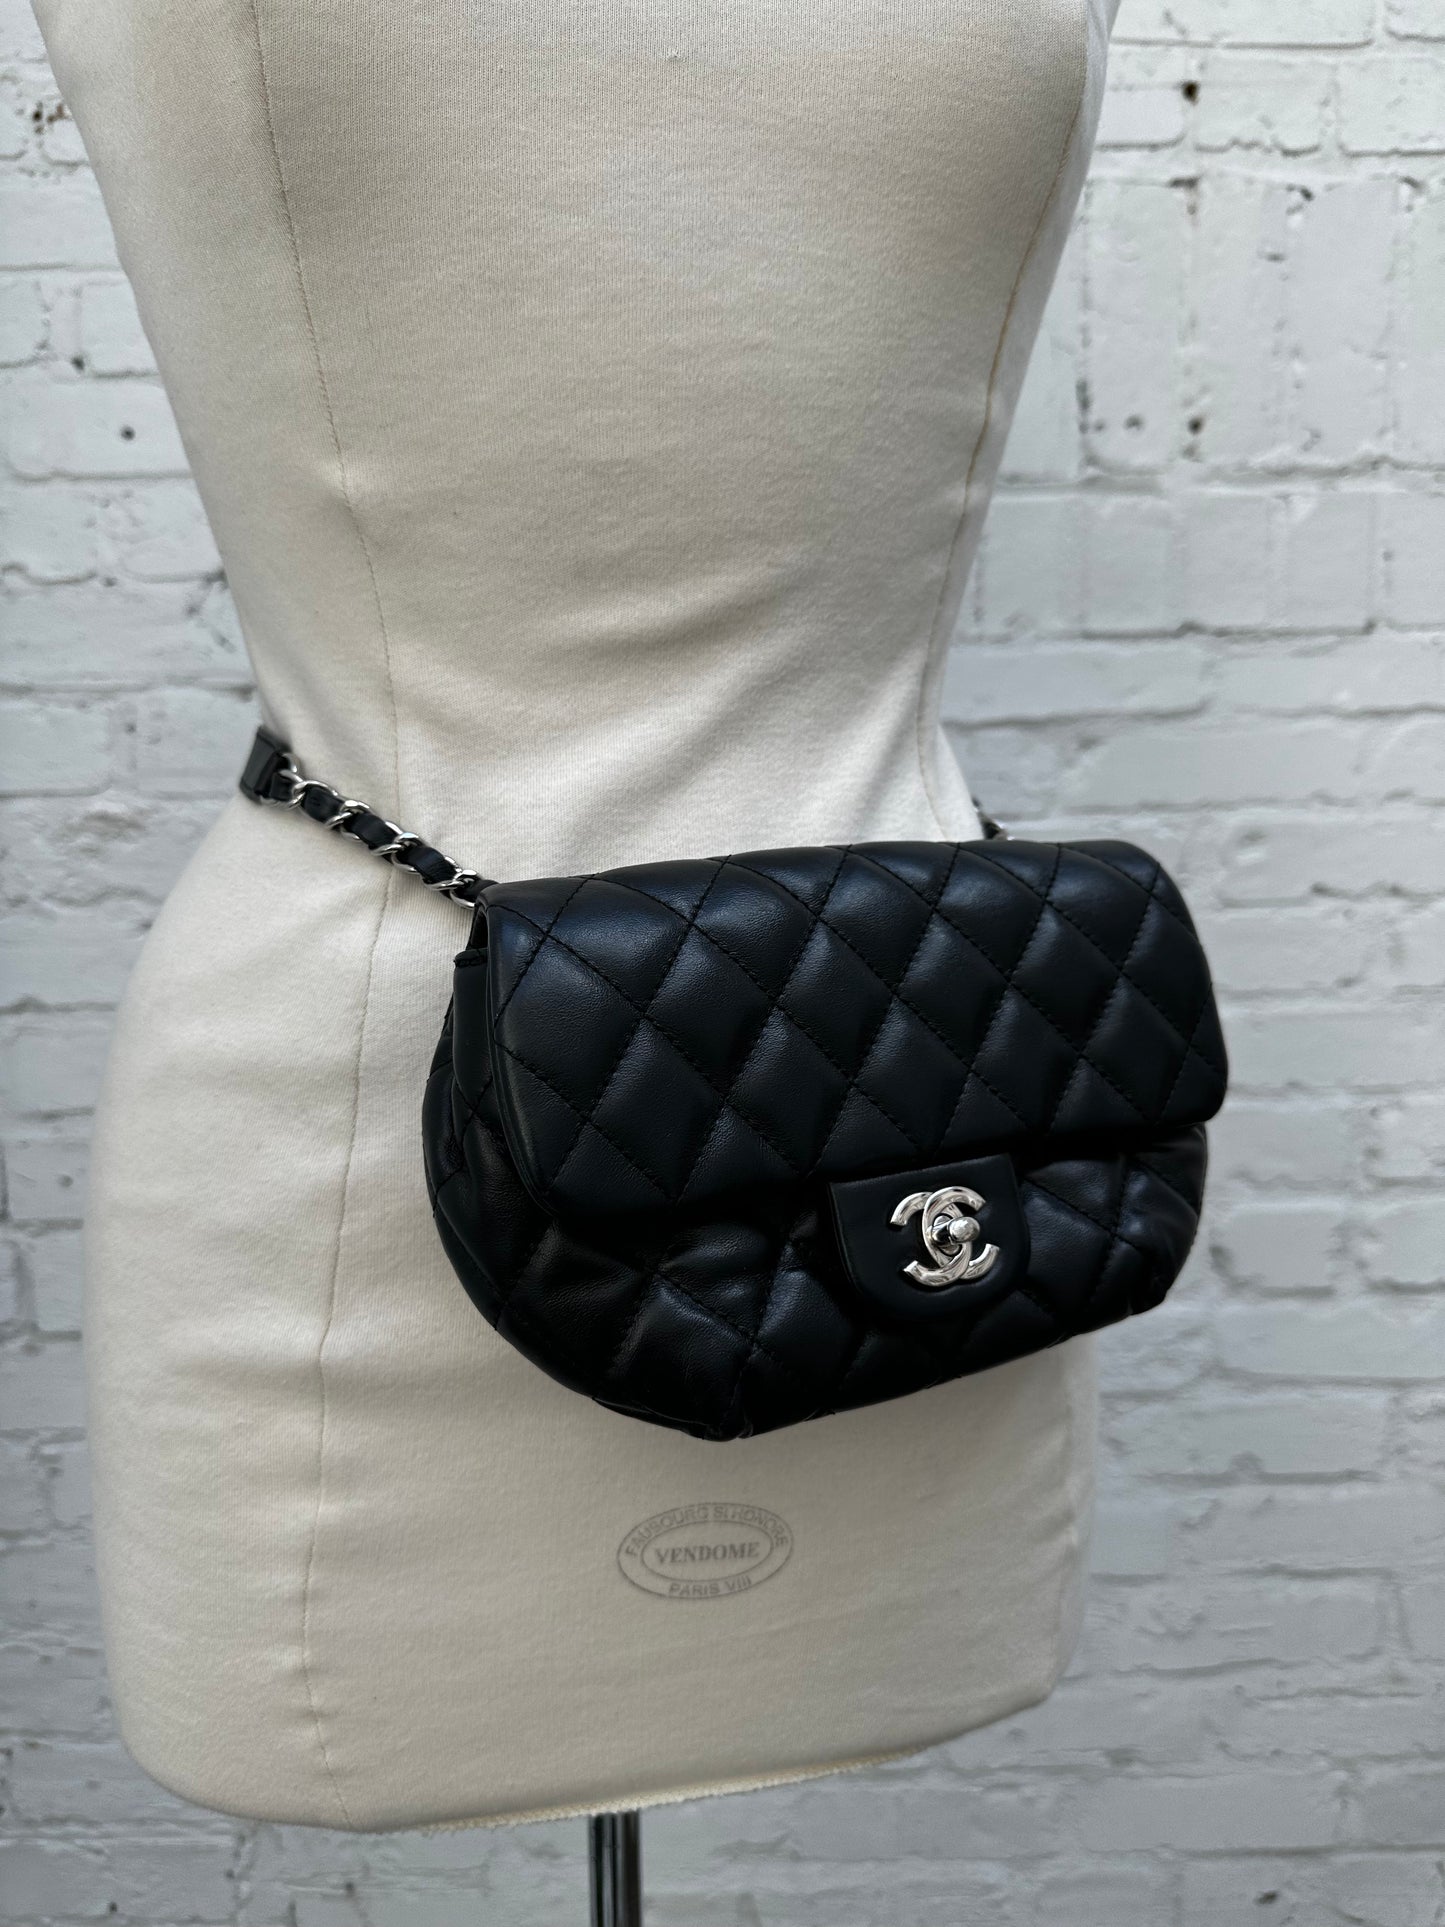 Chanel Lambskin Leather Quilted Black Bum Bag SHW